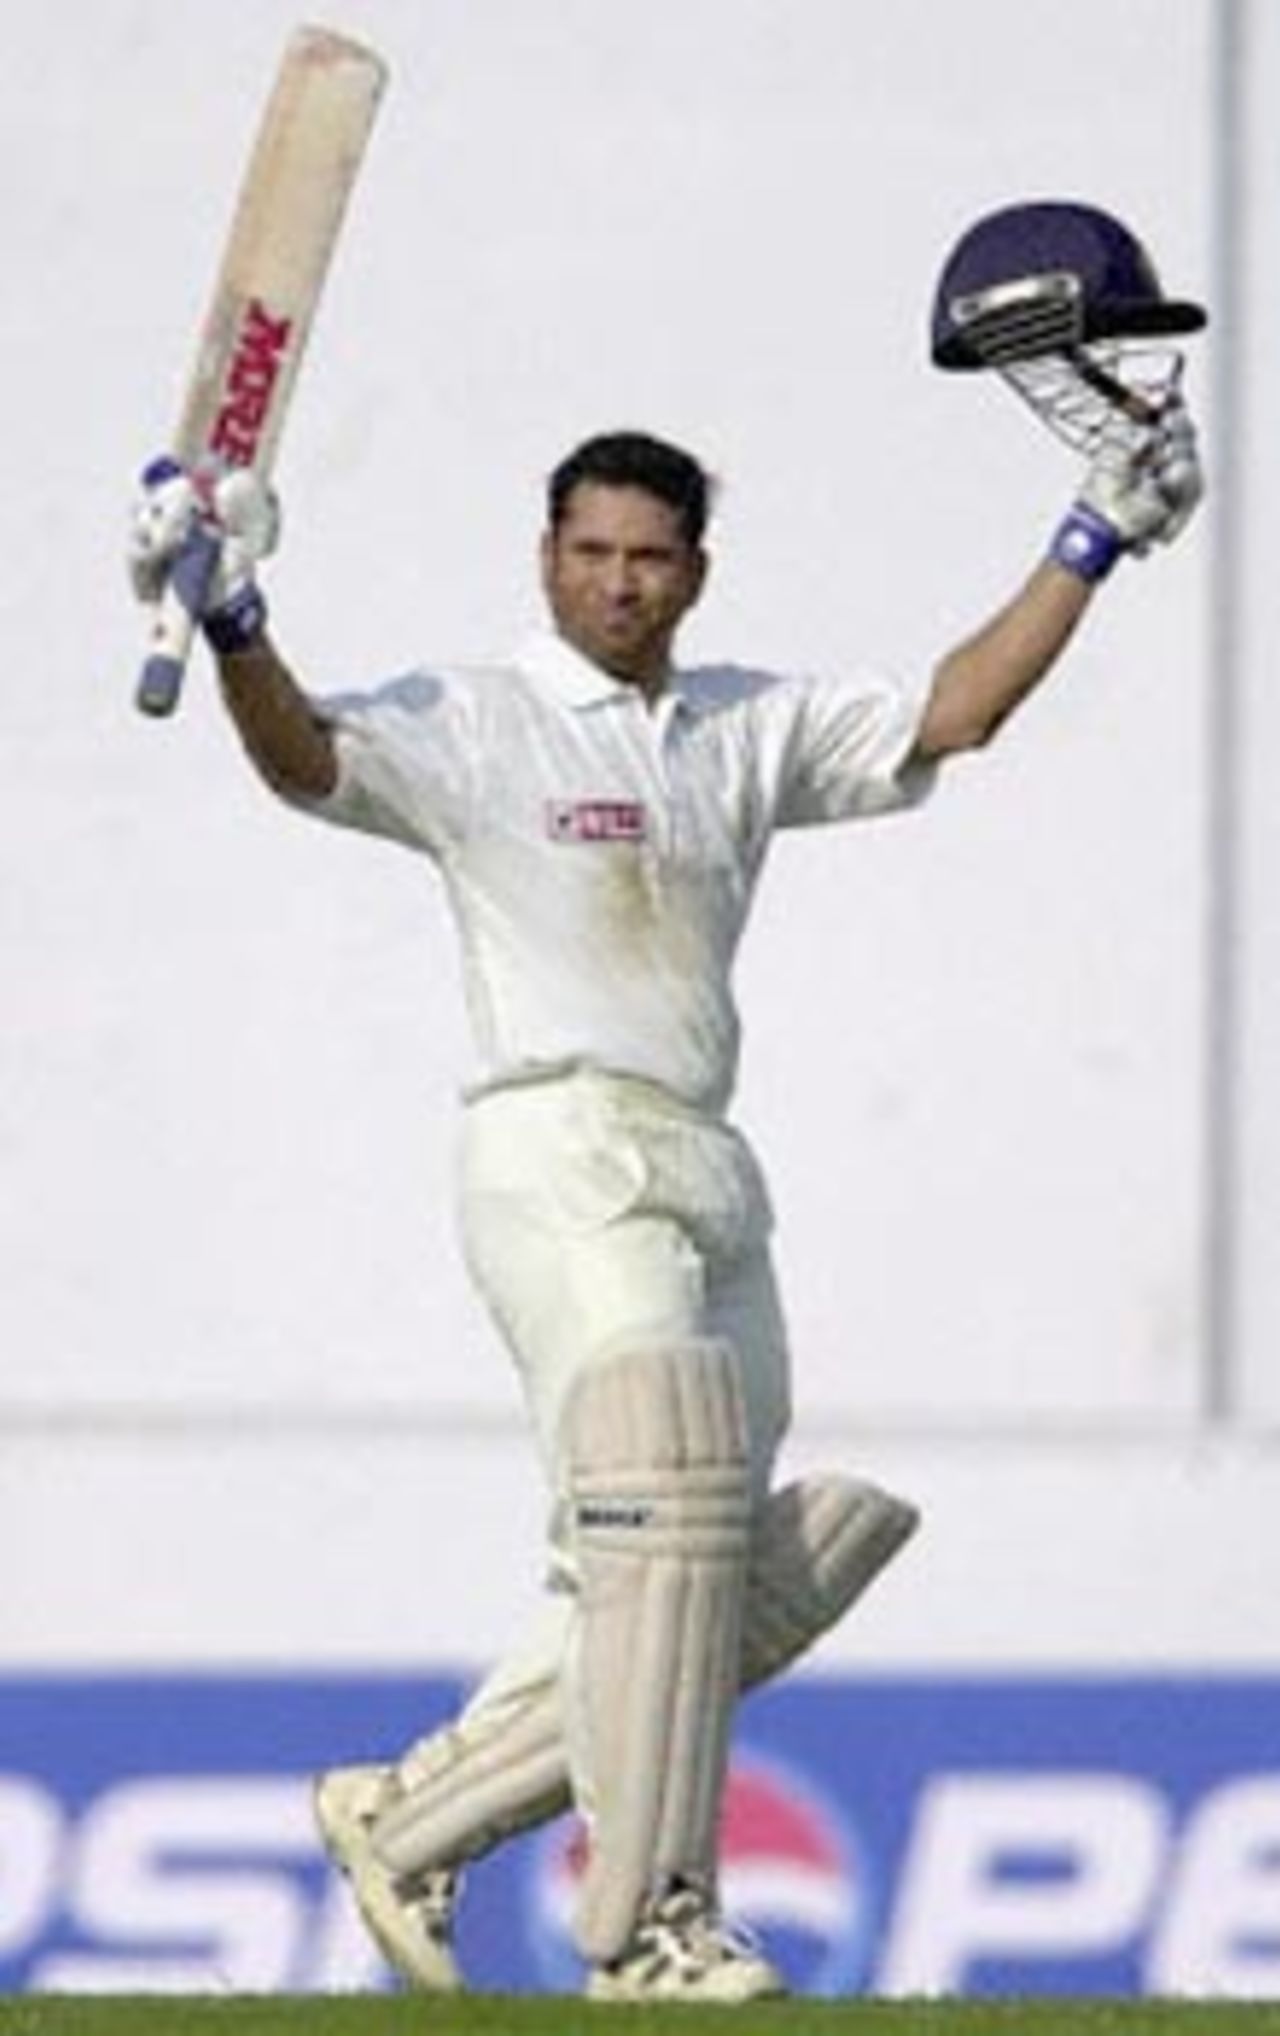 Indian ace batsman Sachin Tendulkar raises his bat and helmet to acknowledge the cheering crowd after scoring a double century on the second day of the second Test match between India and Zimbabwe, 26 November 2000 in Nagpur. Sachin Tenulkar remained unbeaten on 201 as India declared at 609 runs for six wickets.